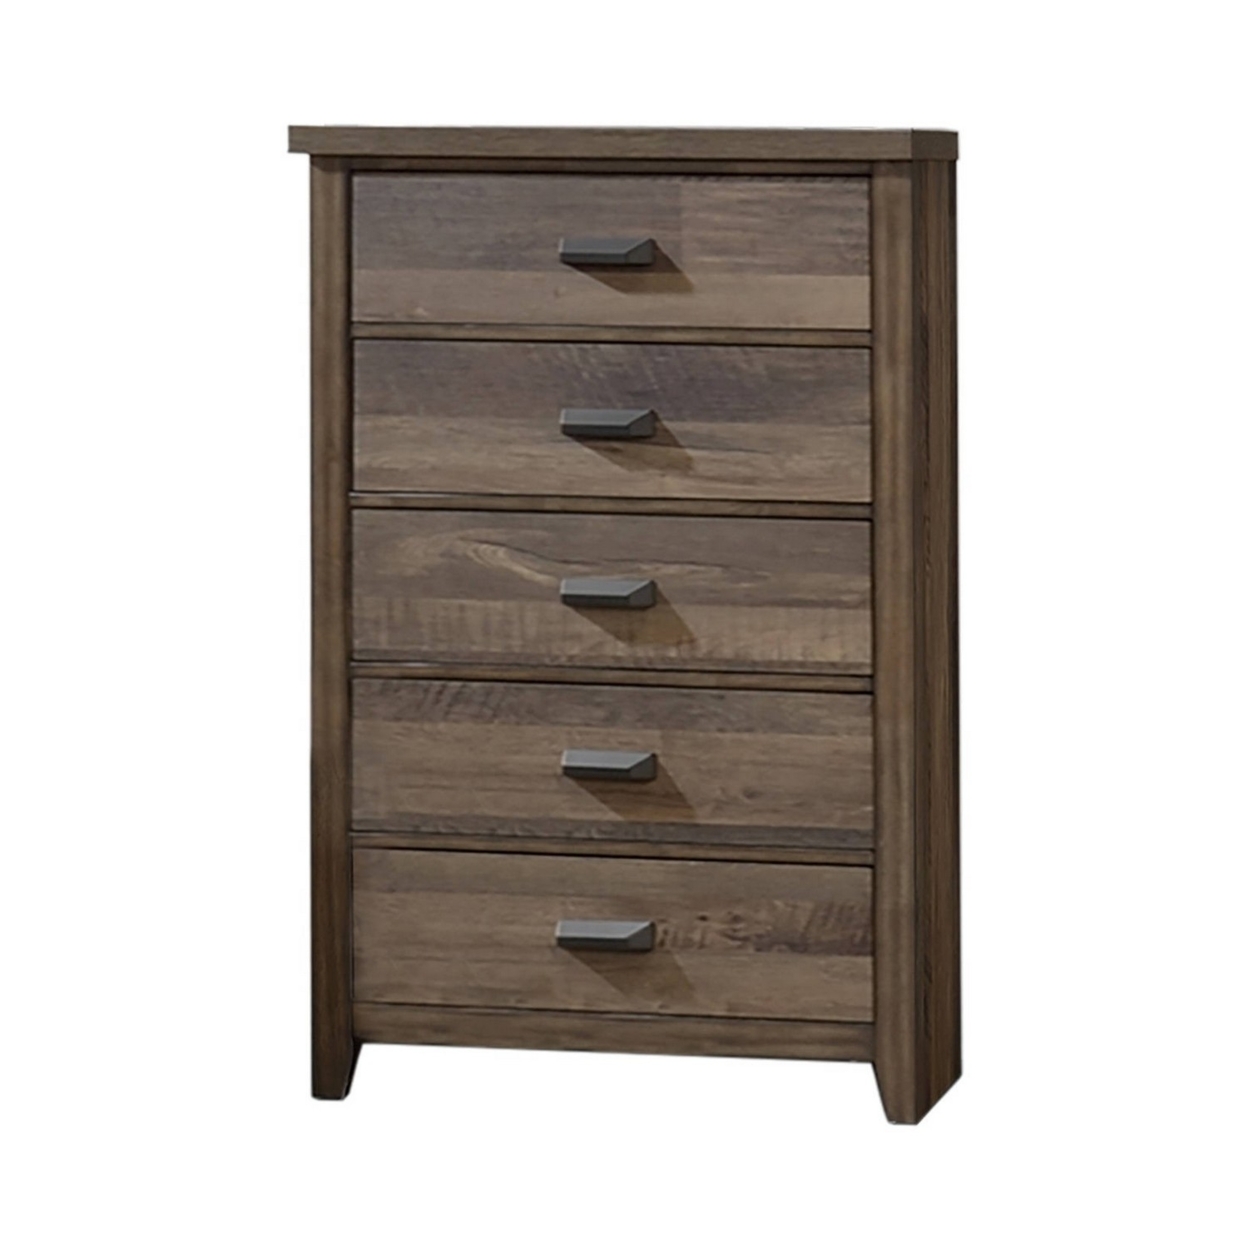 Chest With 5 Drawers And Wood Grain Details, Brown- Saltoro Sherpi